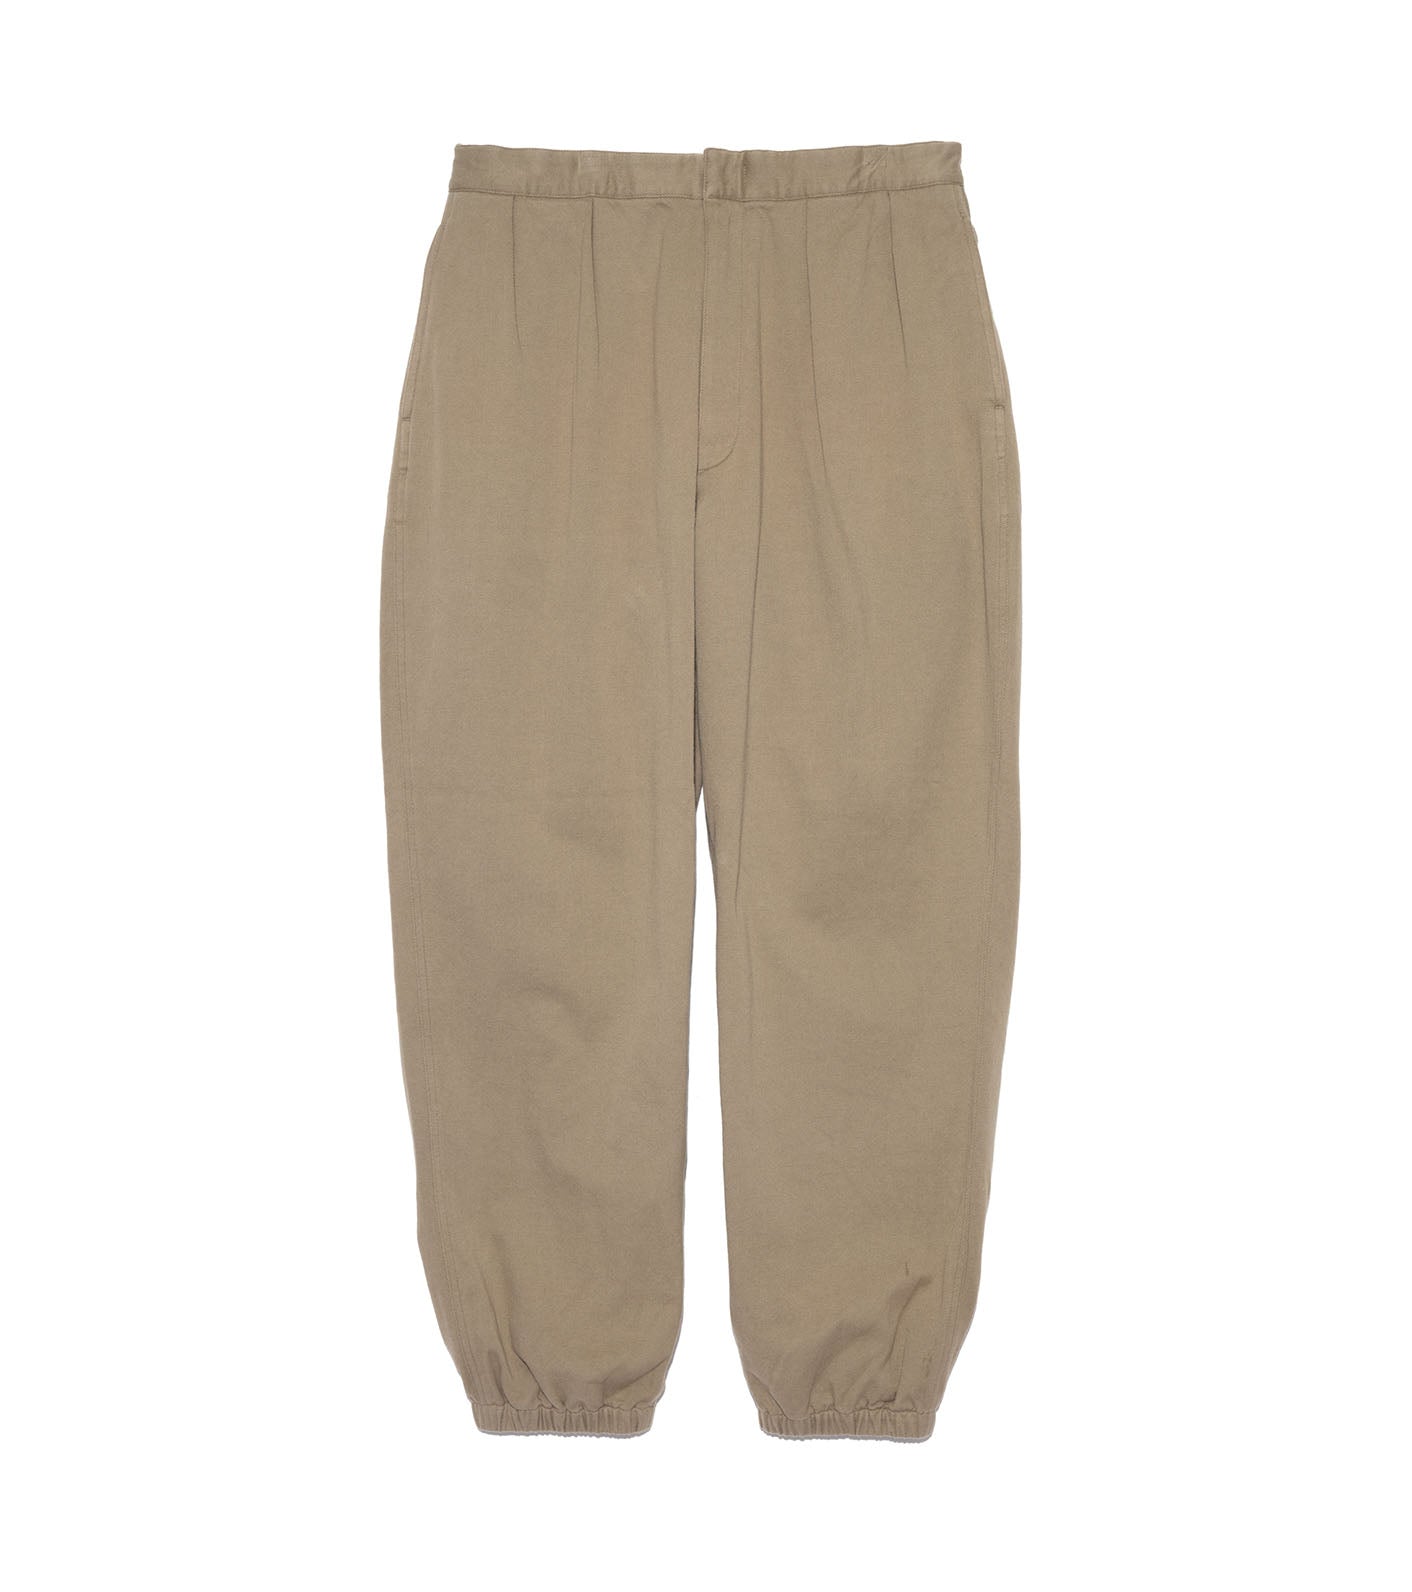 Anatoly & Sons Twill Cotton Pants